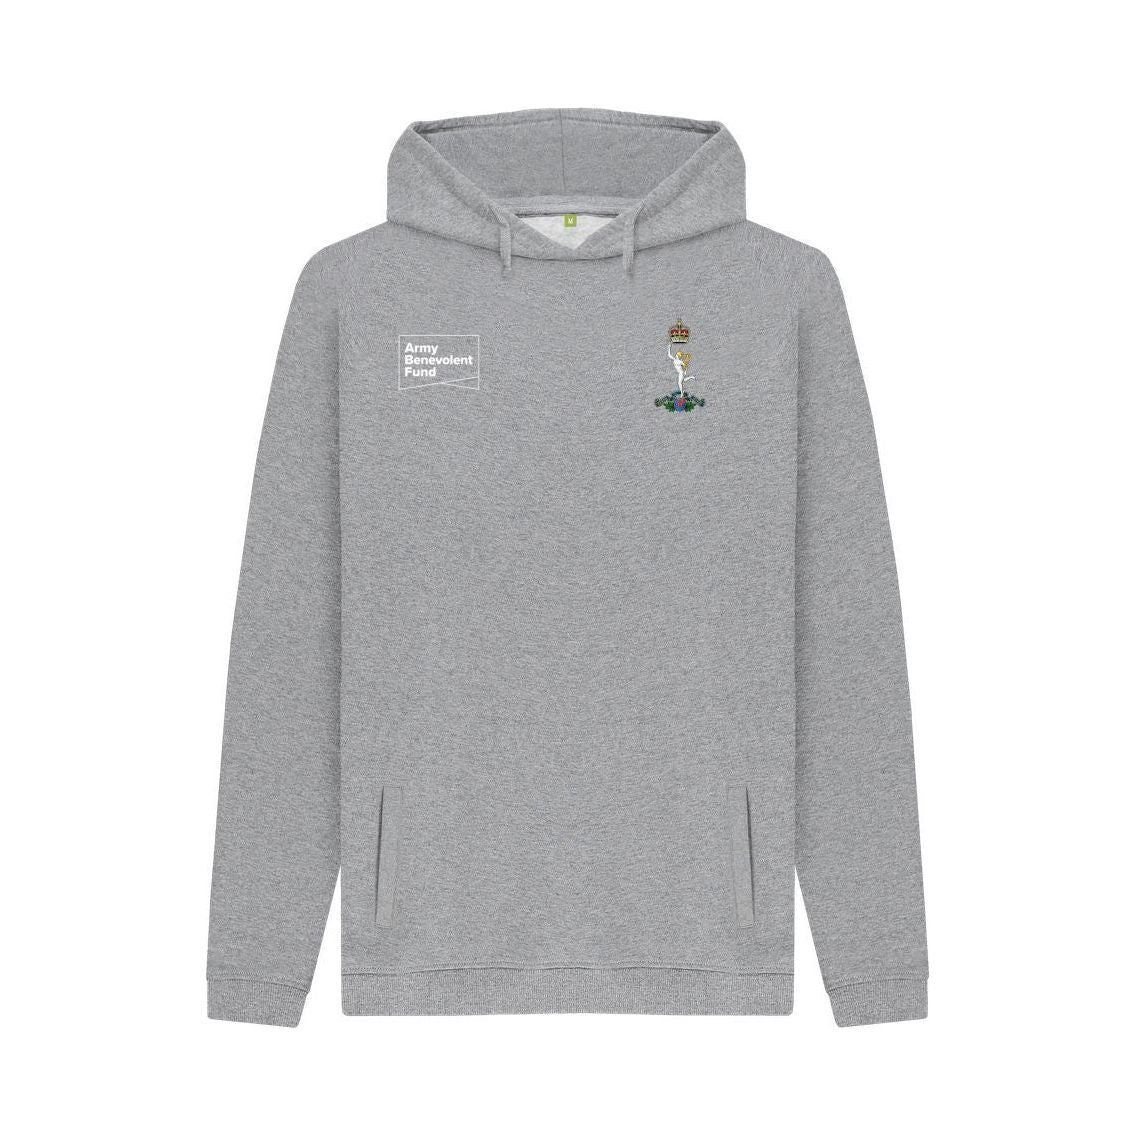 Royal Corps of Signals Unisex Hoodie - Army Benevolent Fund